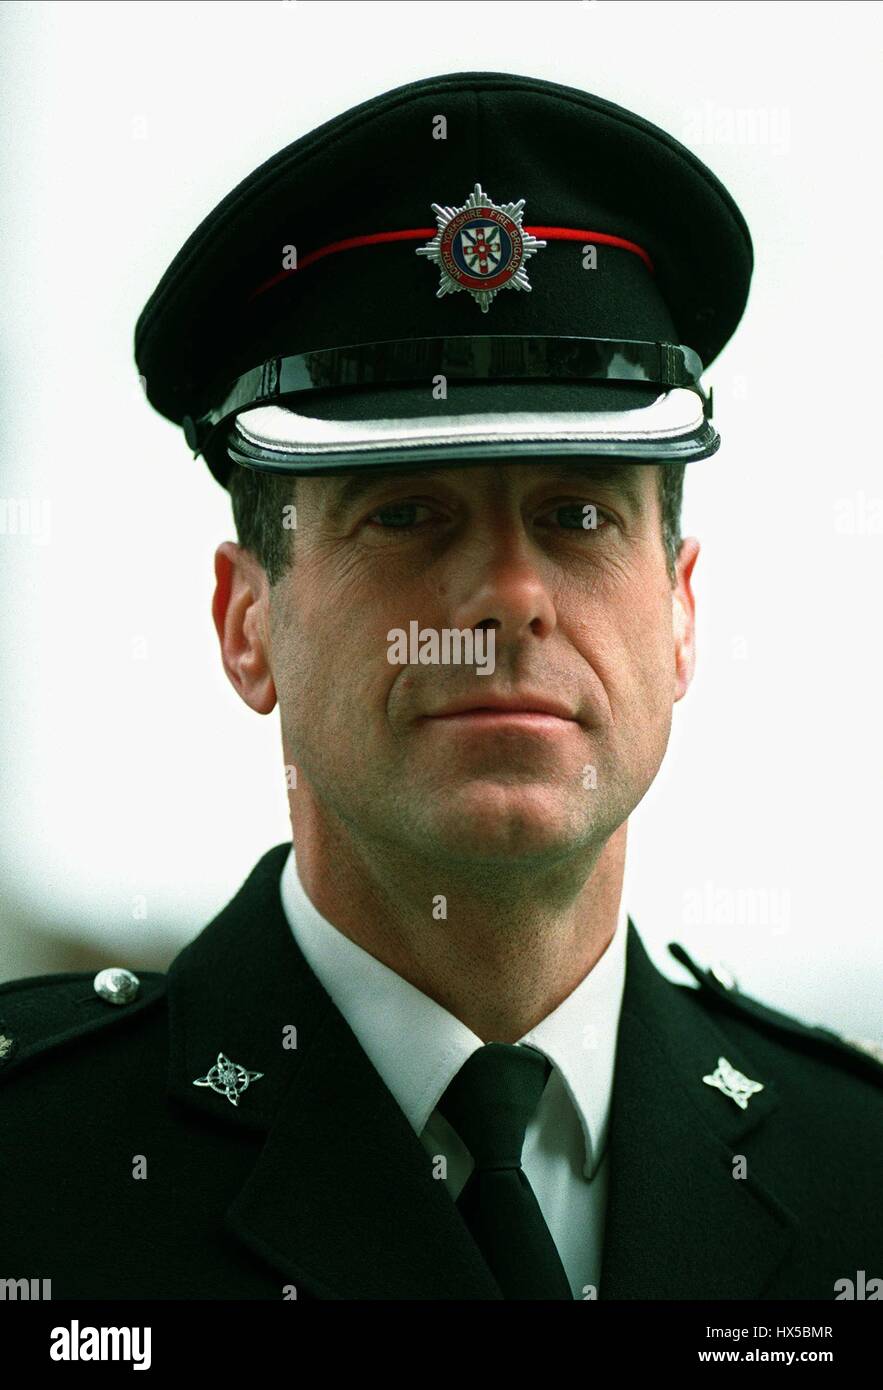 DIV. OFFICER ALAN SOMERS N. YORKS FIRE SERVICE 06 May 1994 Stock Photo